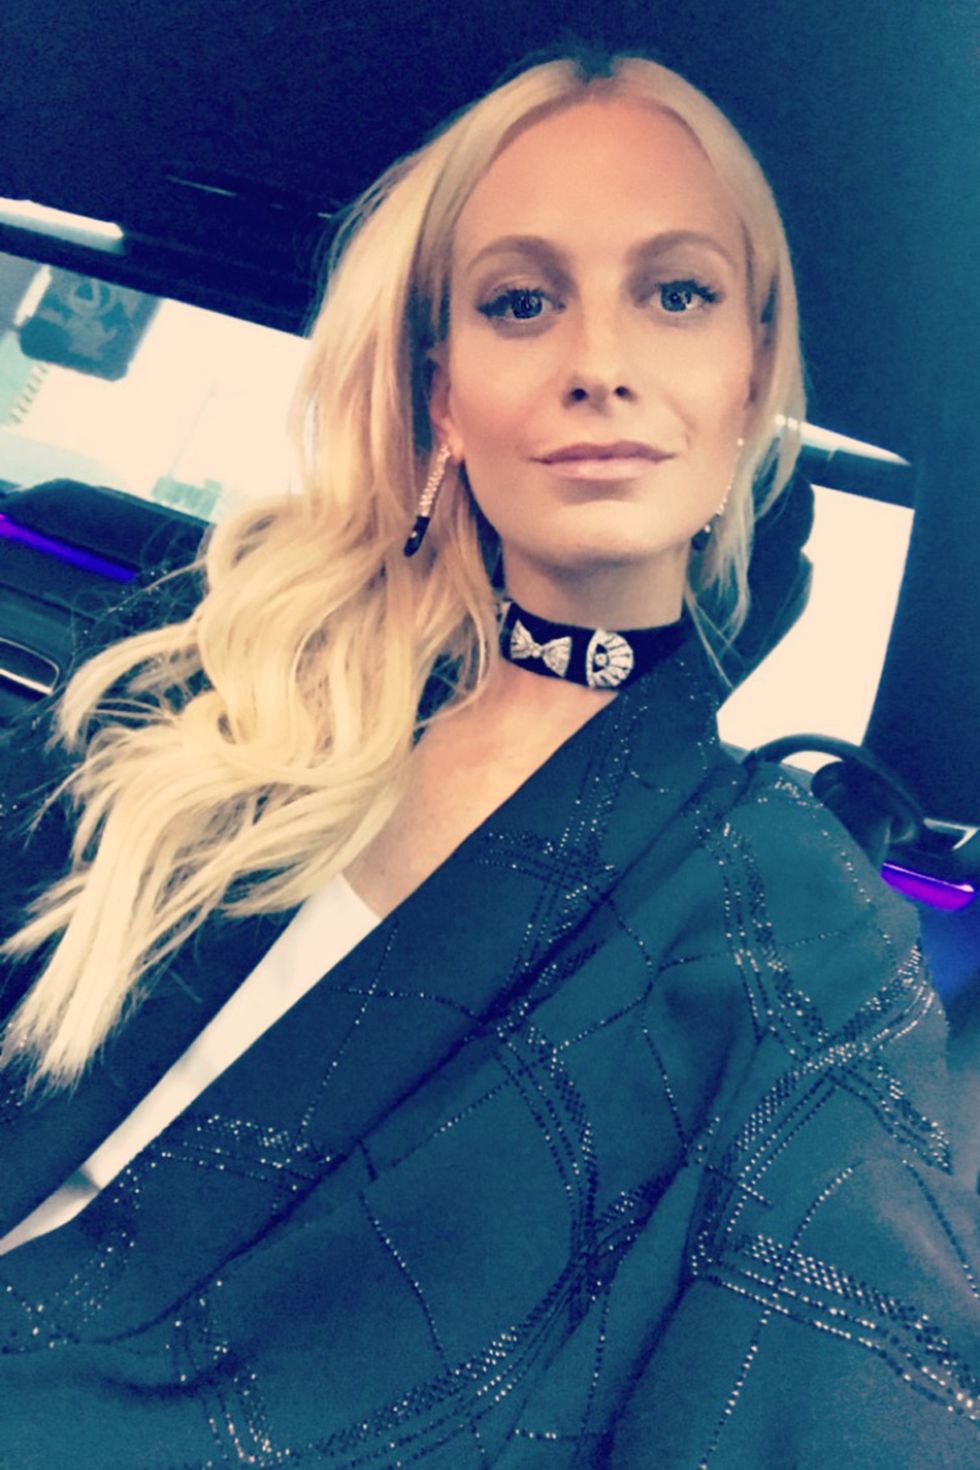 Poppy Delevingne takes us behind the scenes at the Ralph Lauren AW17 show in New York Fashion Week